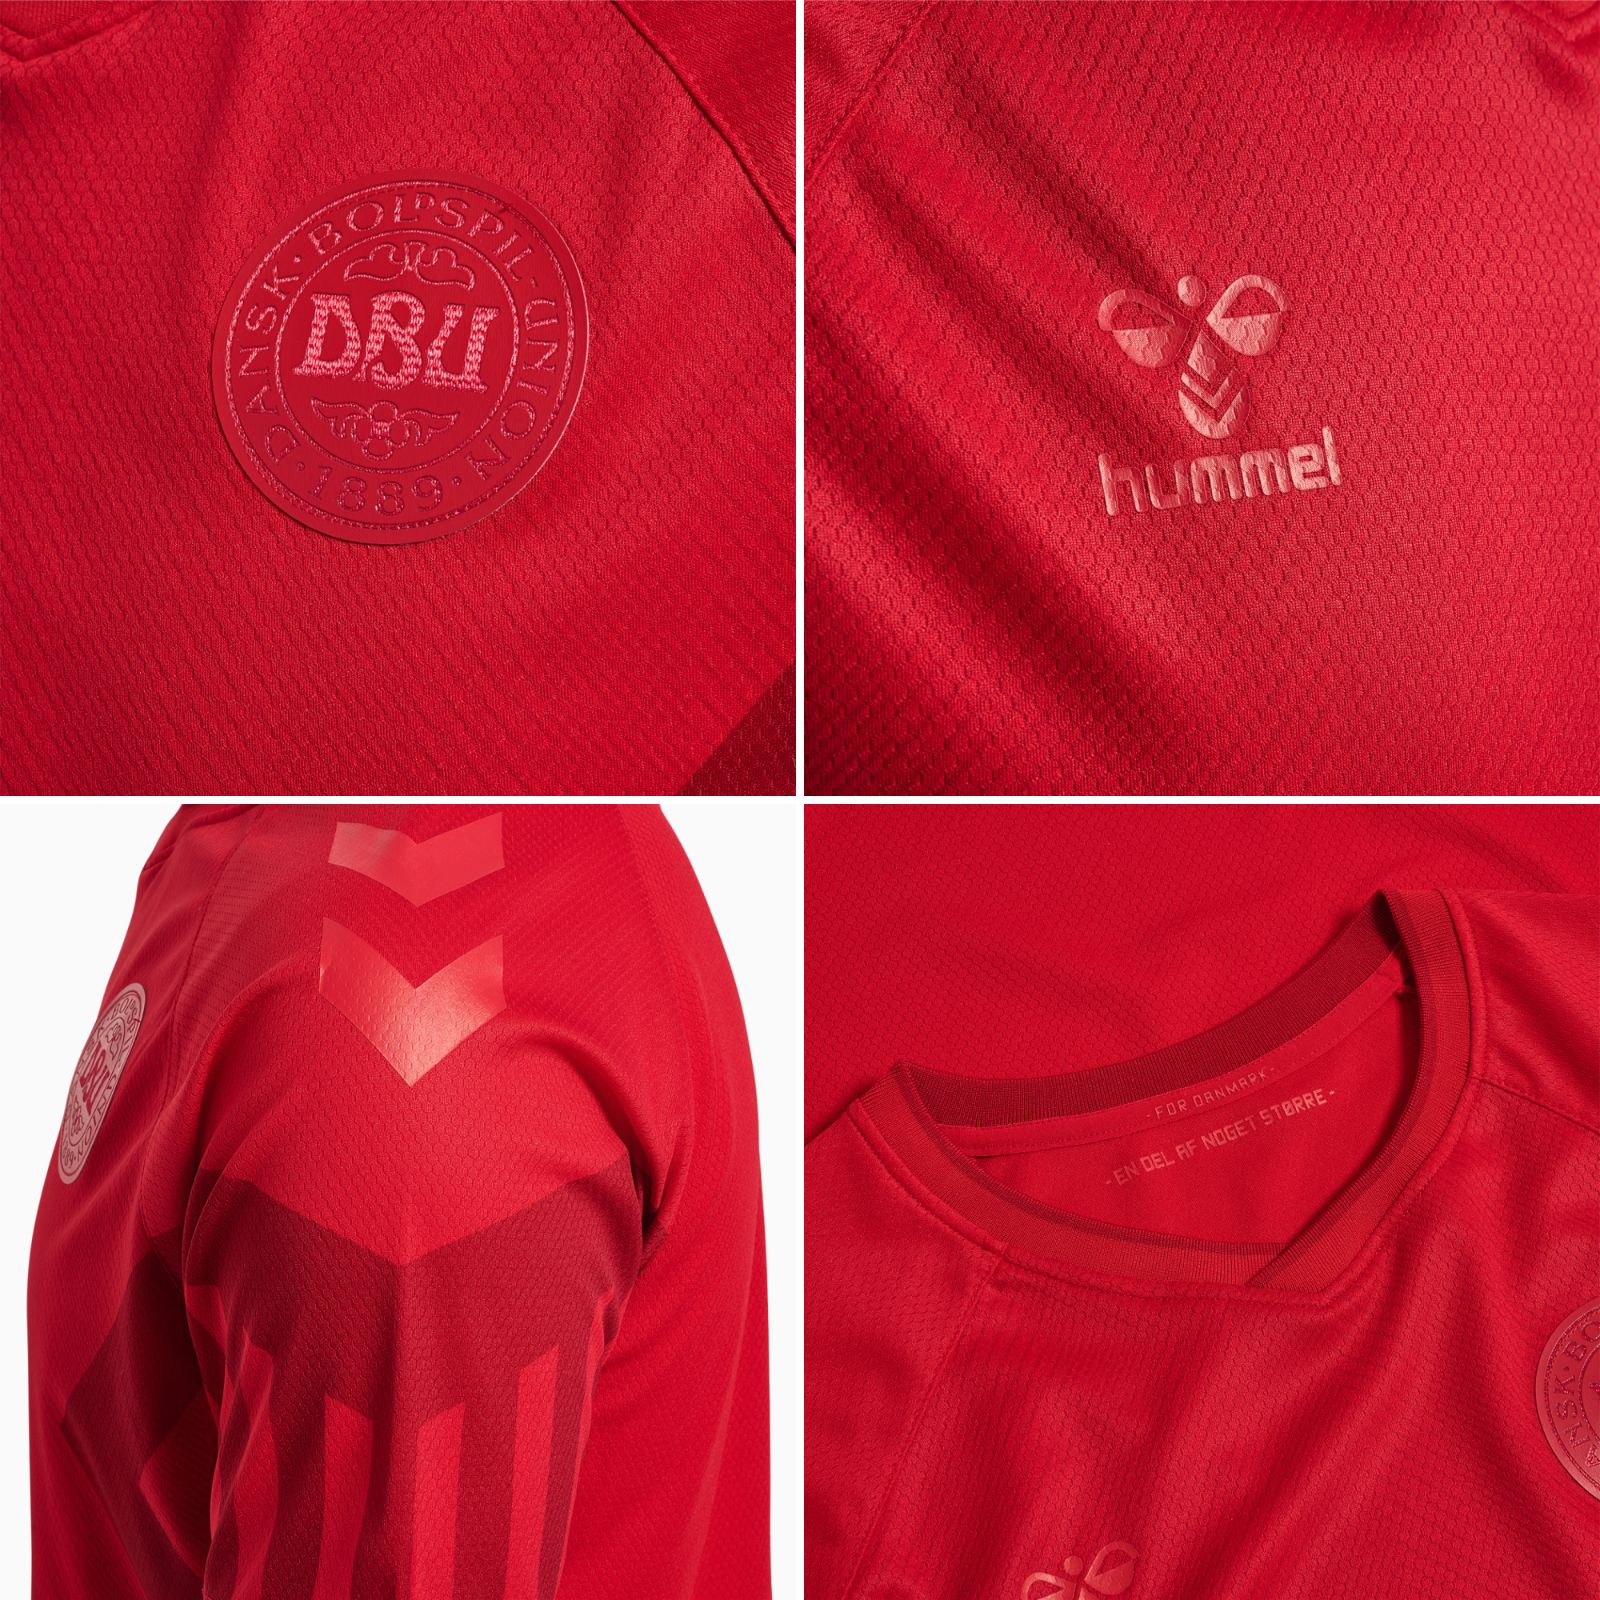 Denmark FIFA World Cup 2022 Home Kit Features